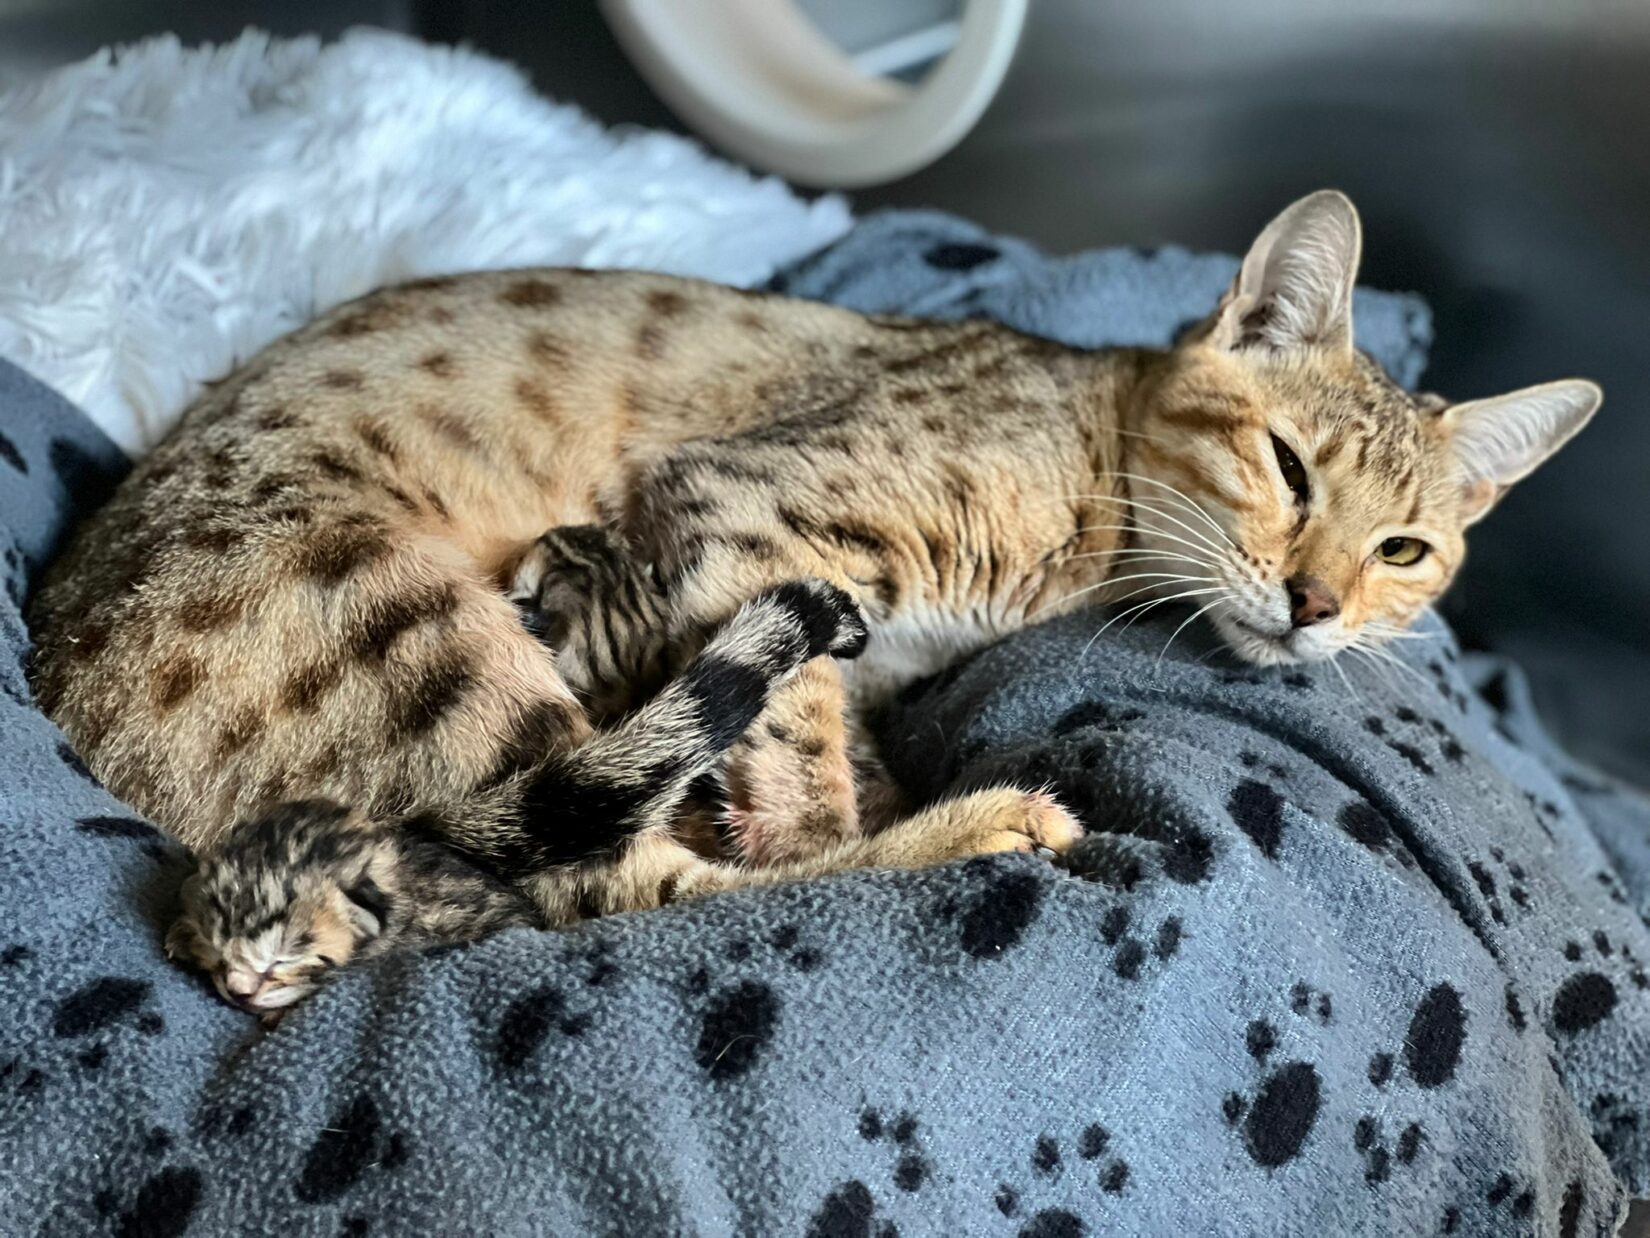 Savannah cat and new born kittens in shelter